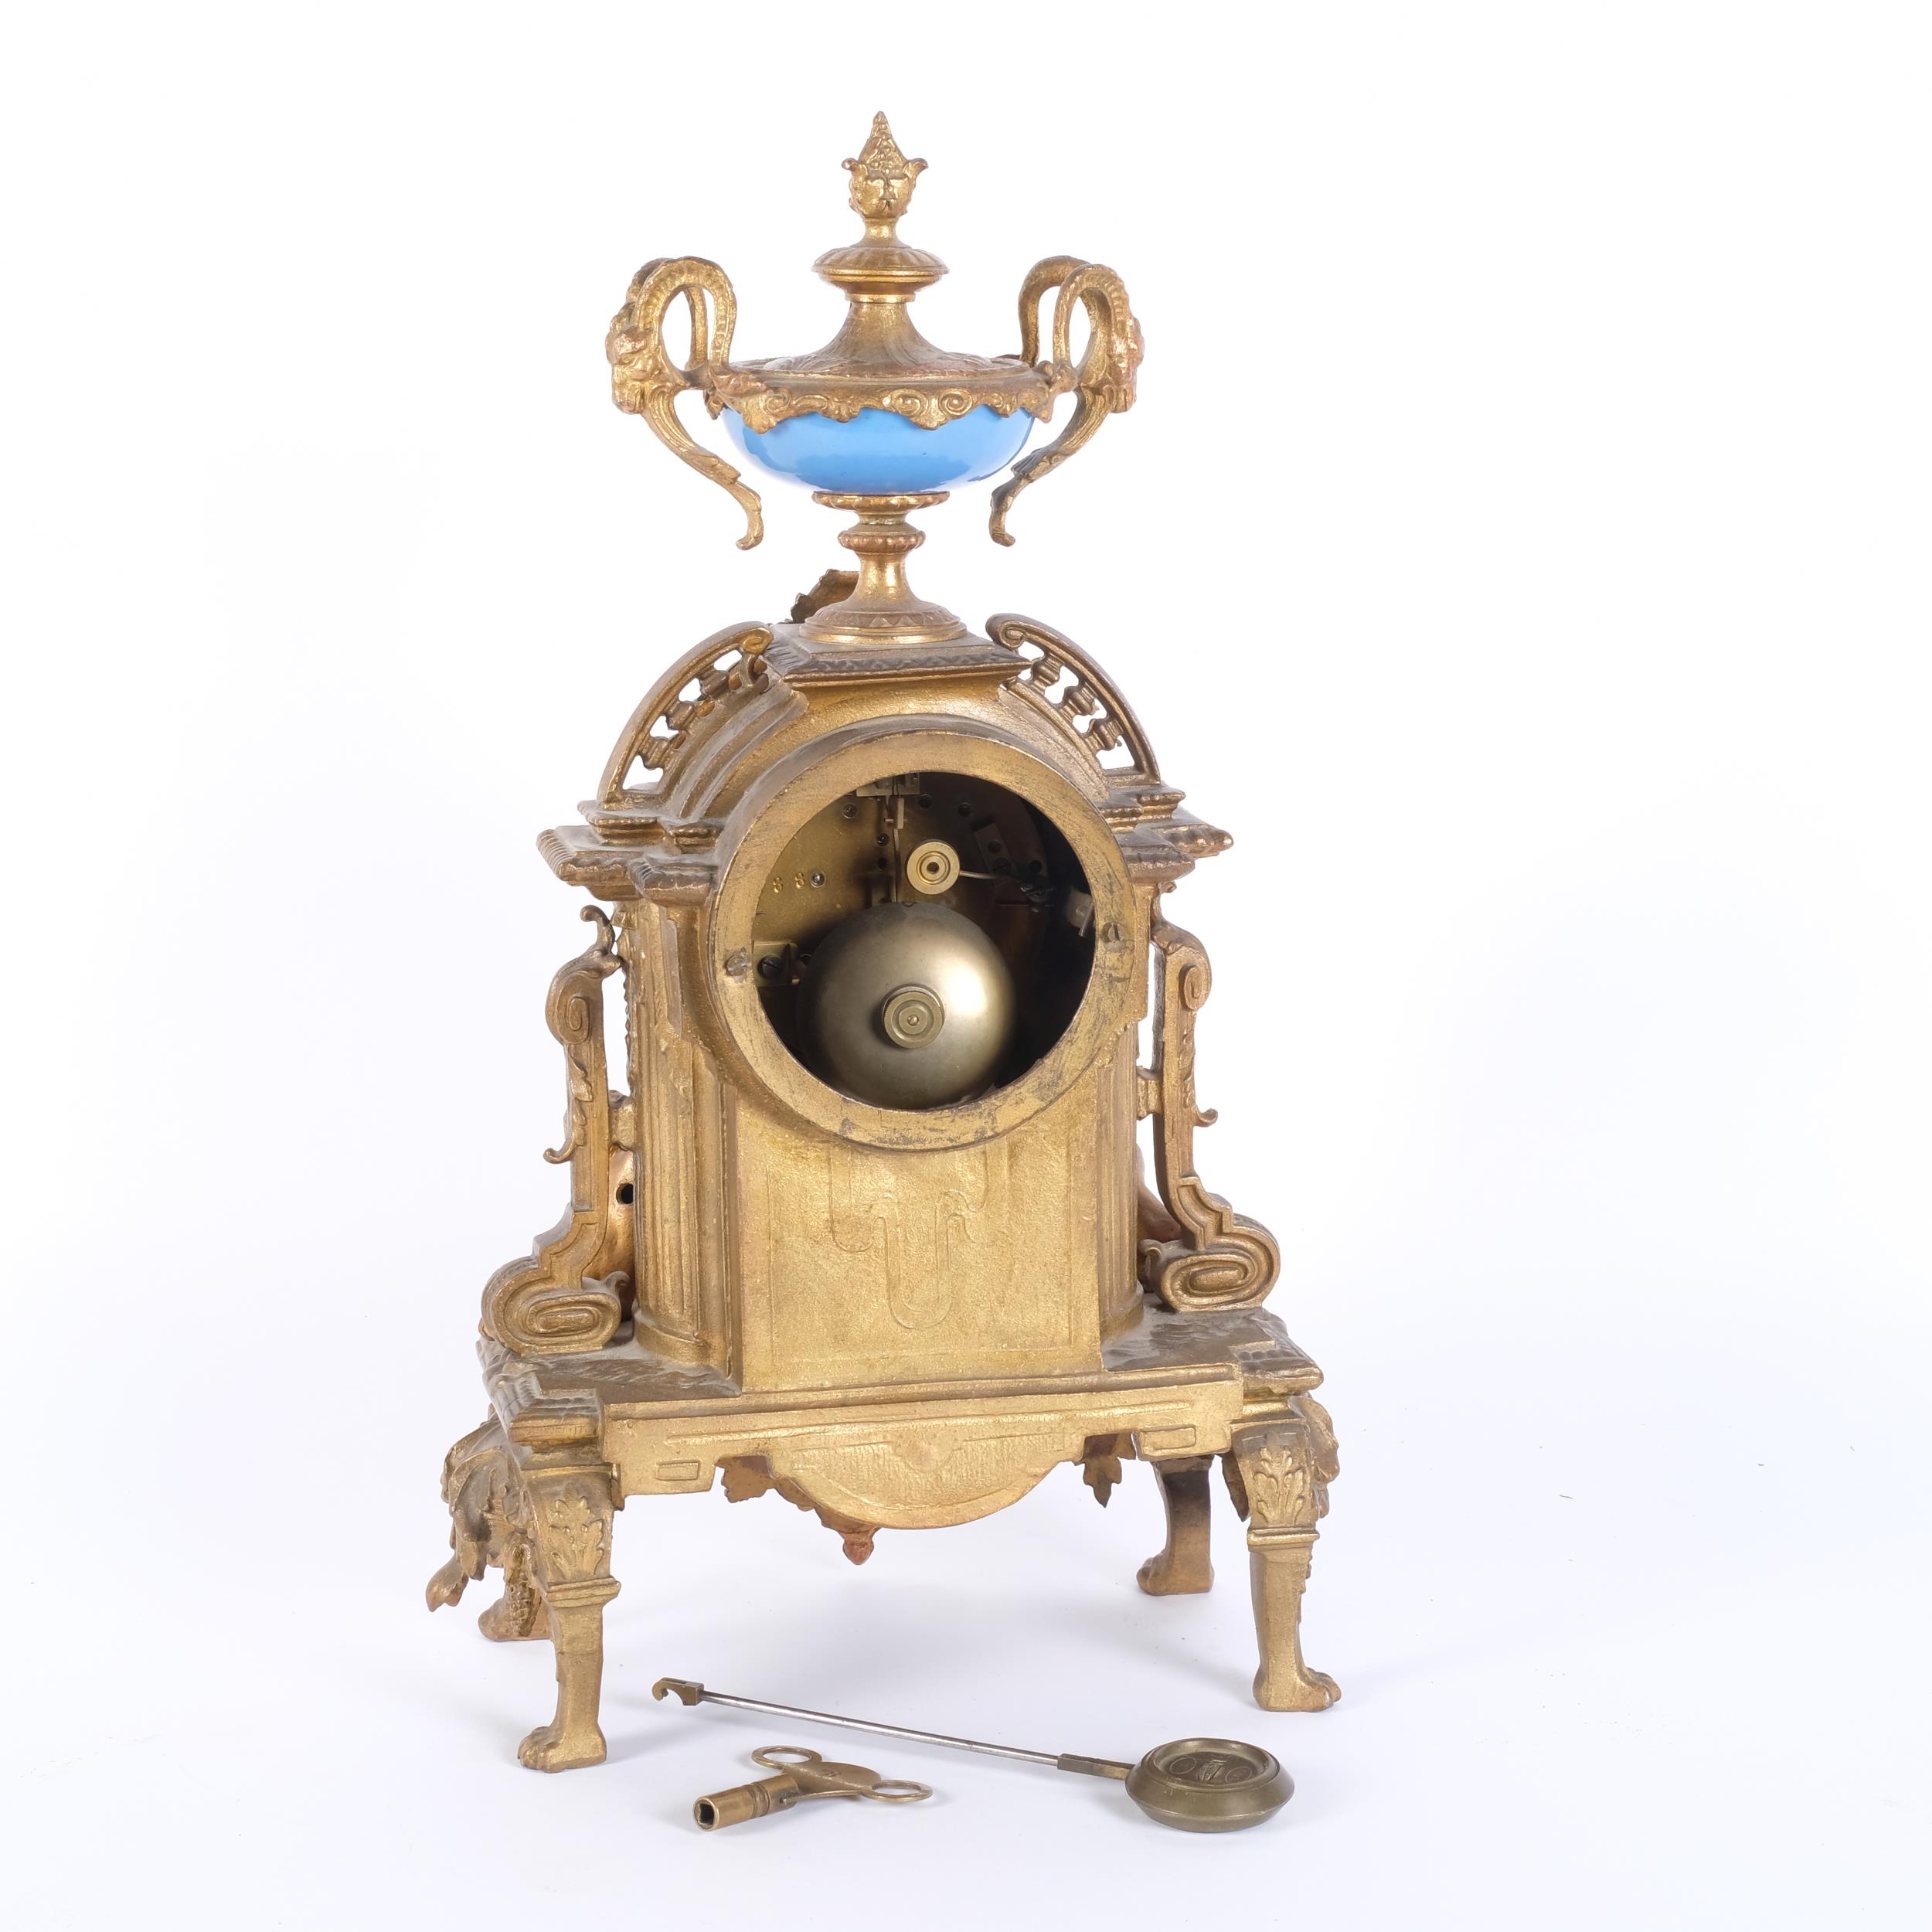 A 19th century French gilt-metal mantel clock, 8-day striking movement, with painted dial and - Image 2 of 2